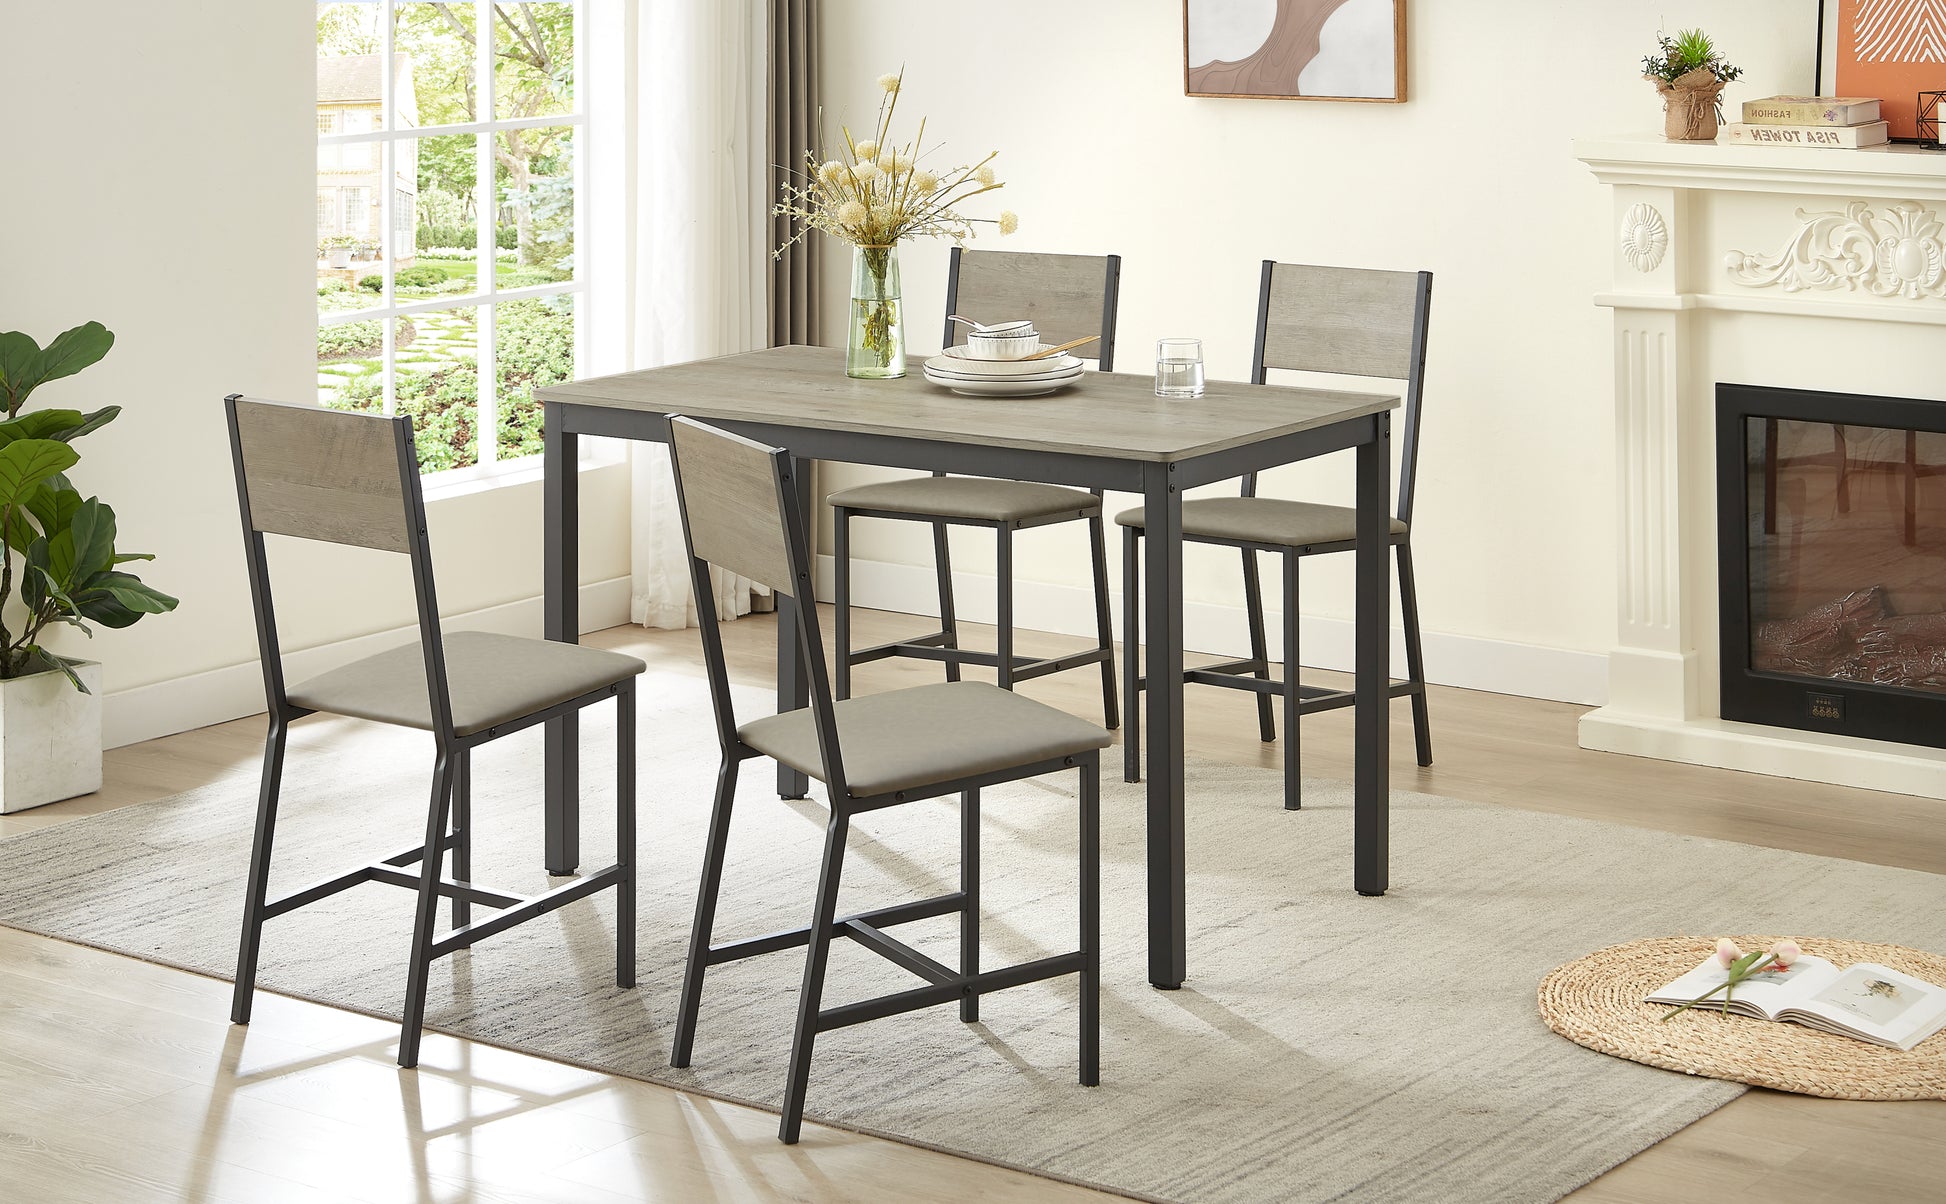 Dining Set for 5 Kitchen Table with 4 Upholstered Chairs, Grey, 47.2'' L x 27.6'' W x 29.7'' H. - Enova Luxe Home Store